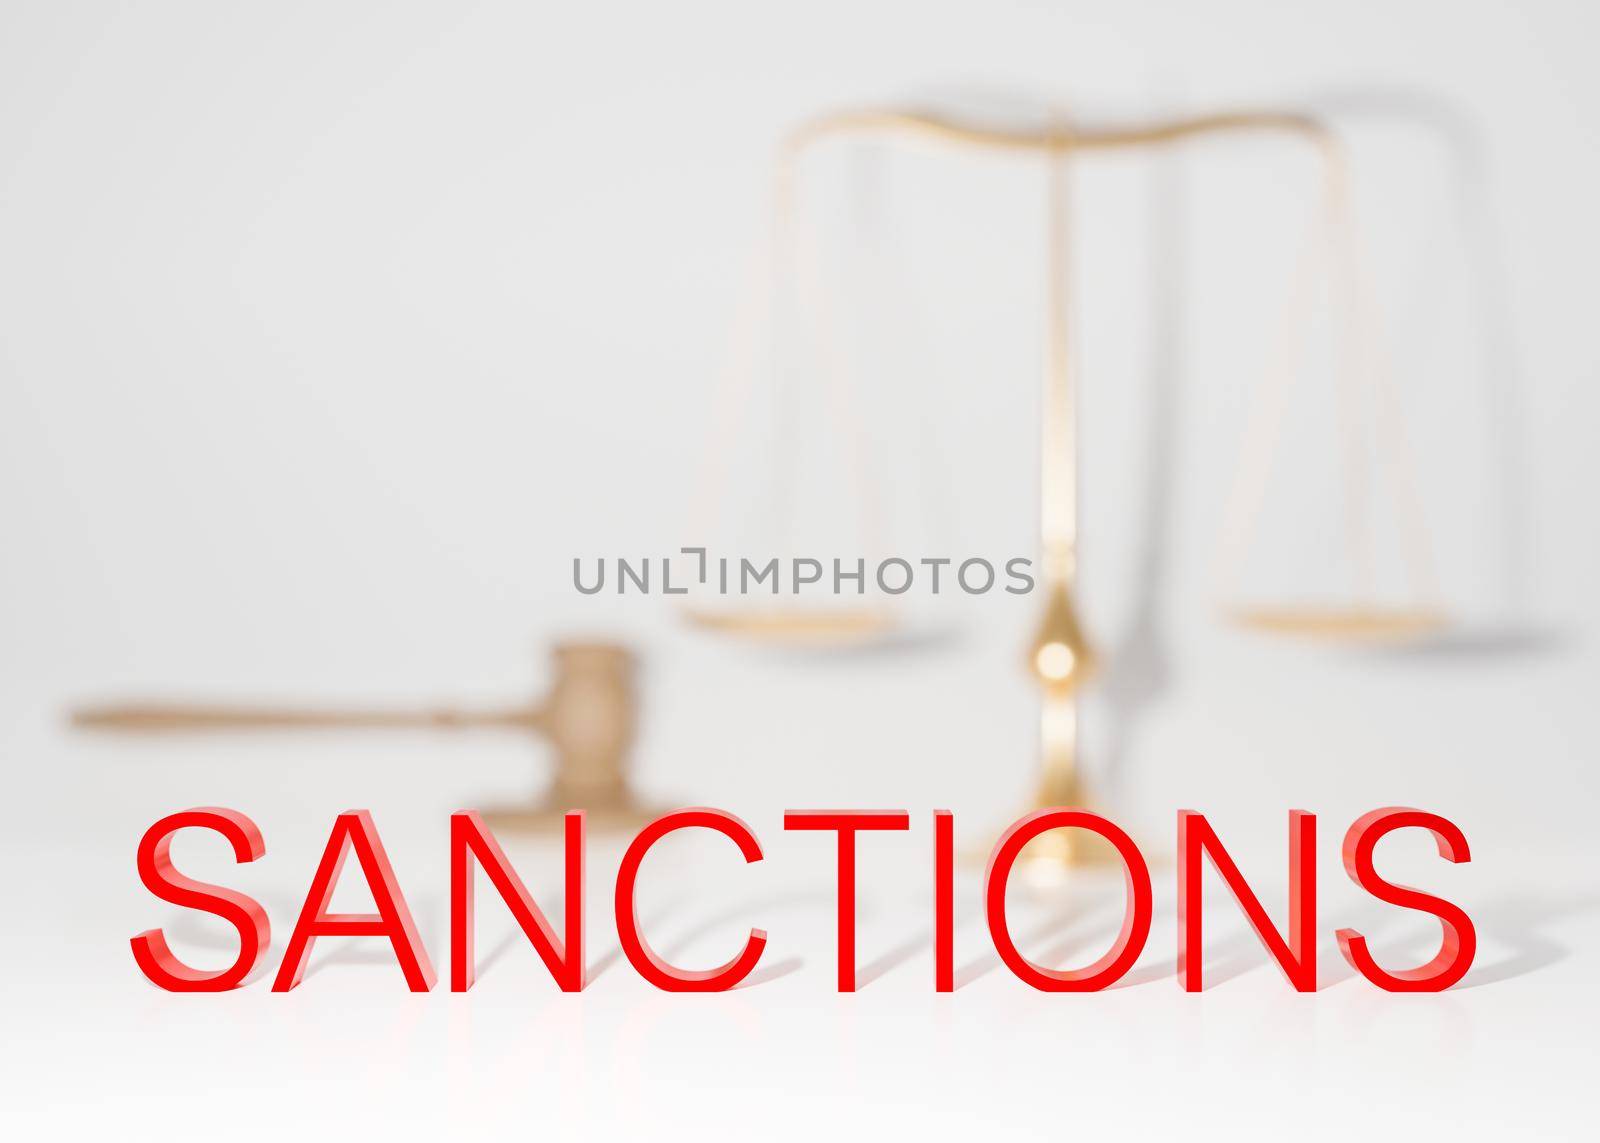 Text SANCTIONS on white background. Economic, financial, political sanctions. Russian oil and gas embargo. Russian Ukrainian conflict. Stop war, occupation. 3D rendering. by creativebird